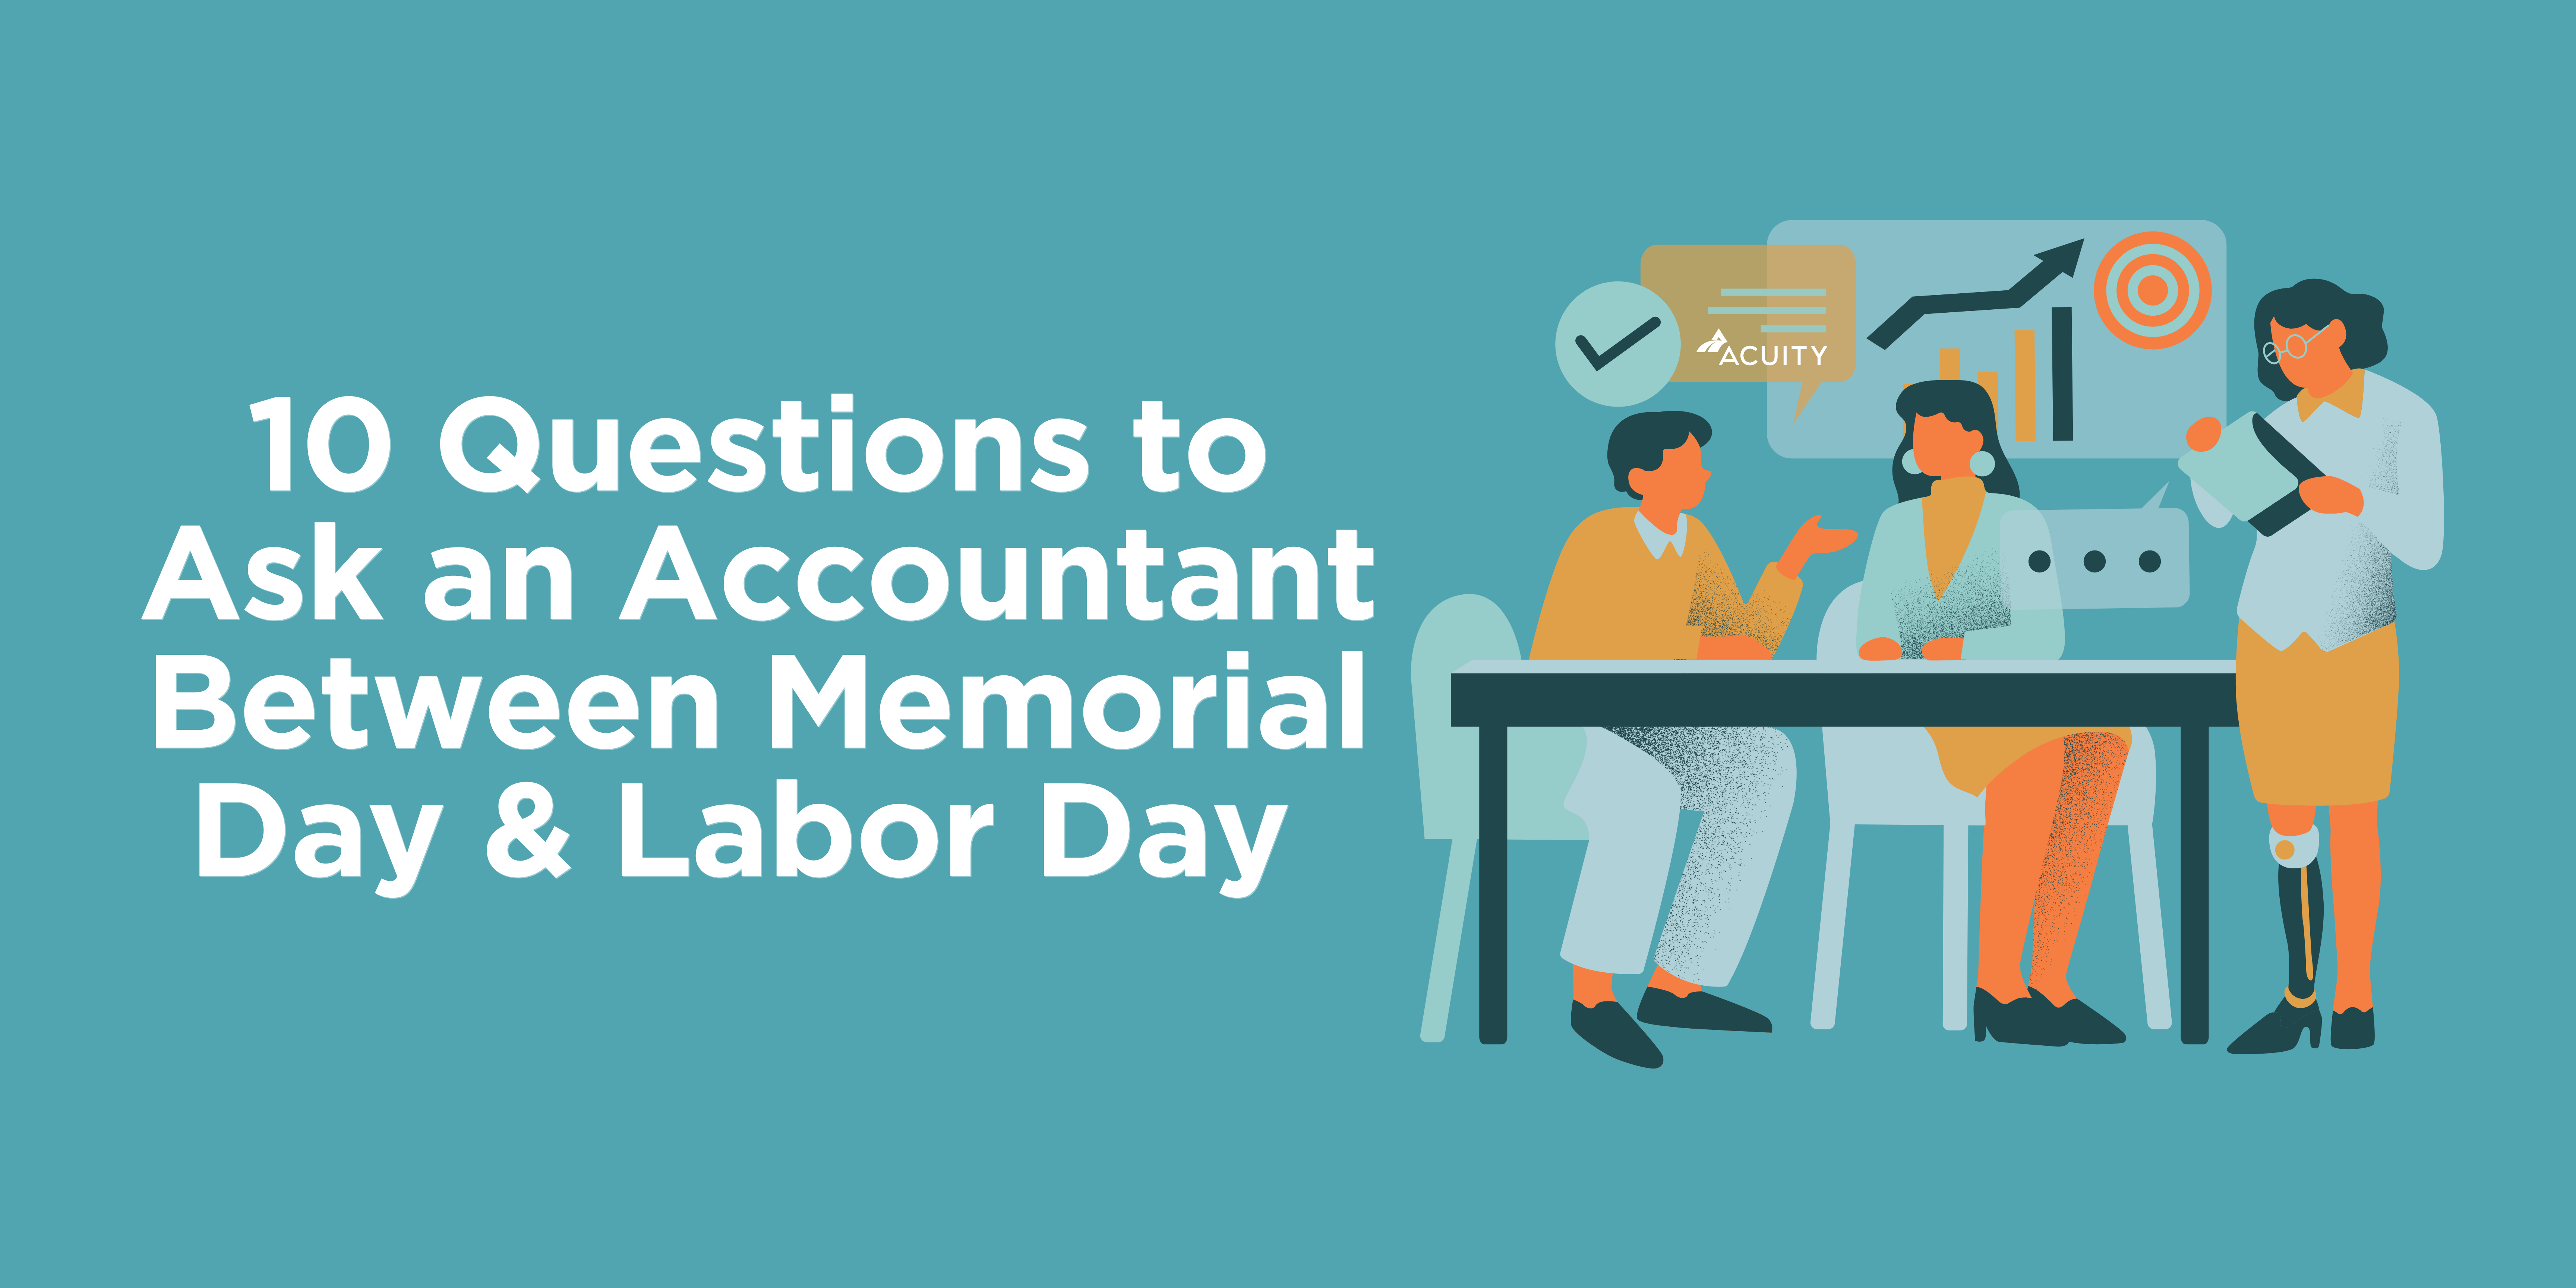 10 Questions Entrepreneurs Should Ask An Accountant Between Memorial Day and Labor Day | Acuity